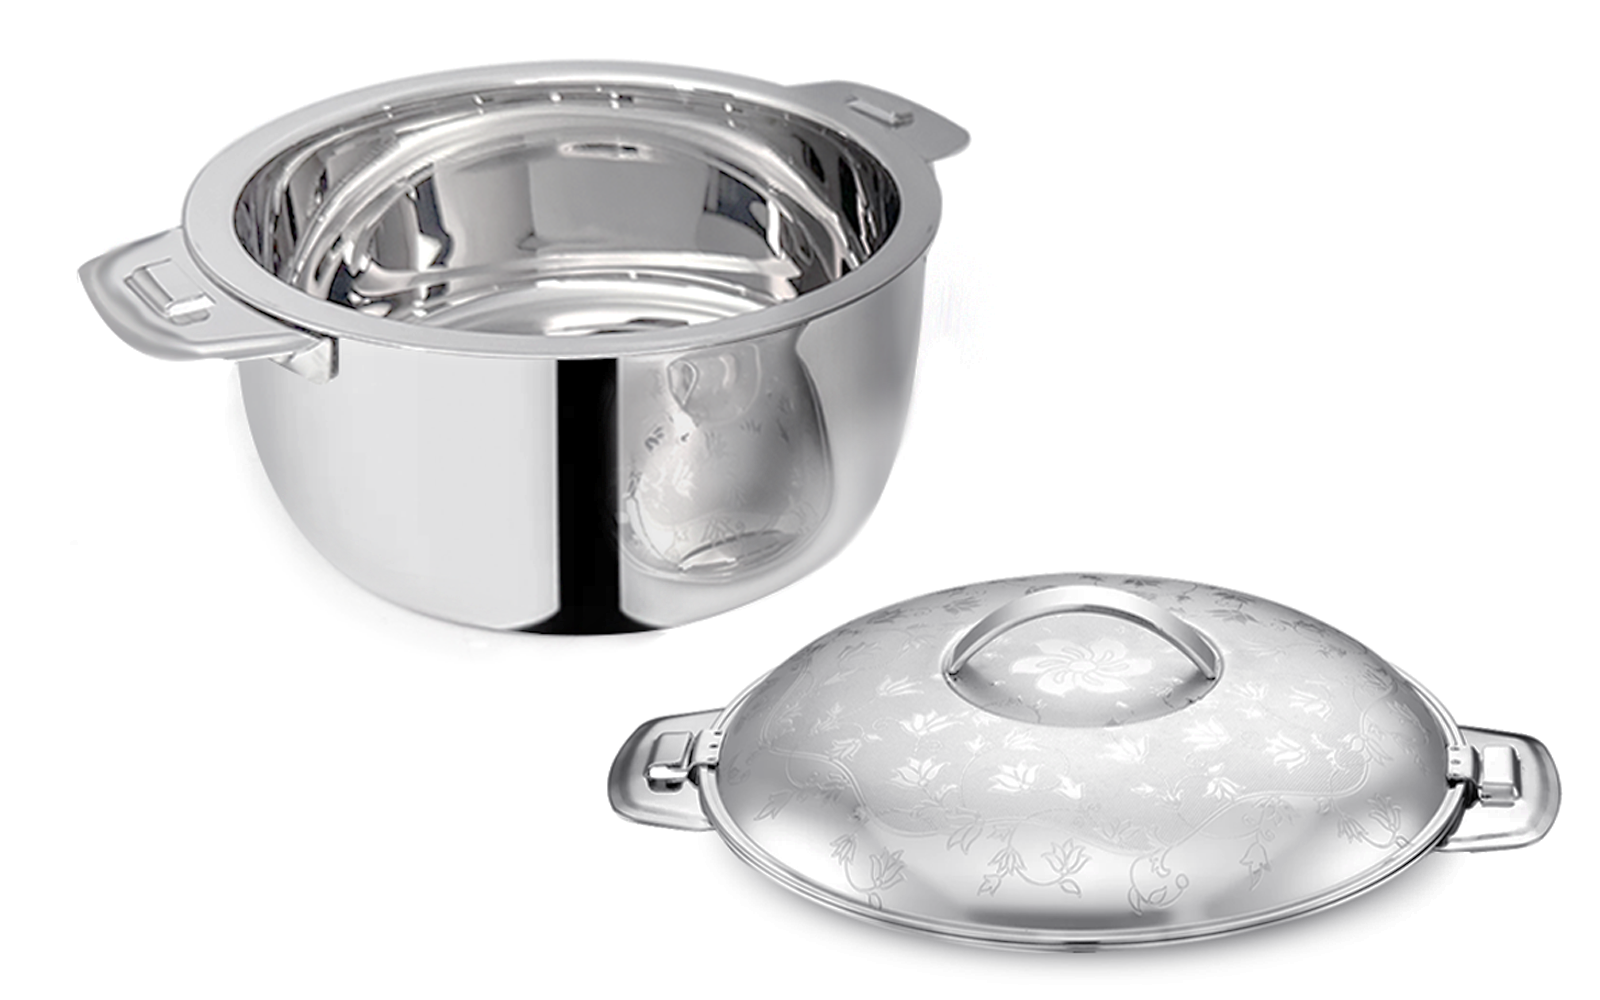 Pradeep Orchid Stainless Steel Insulated Serving Casserole with Design Lid